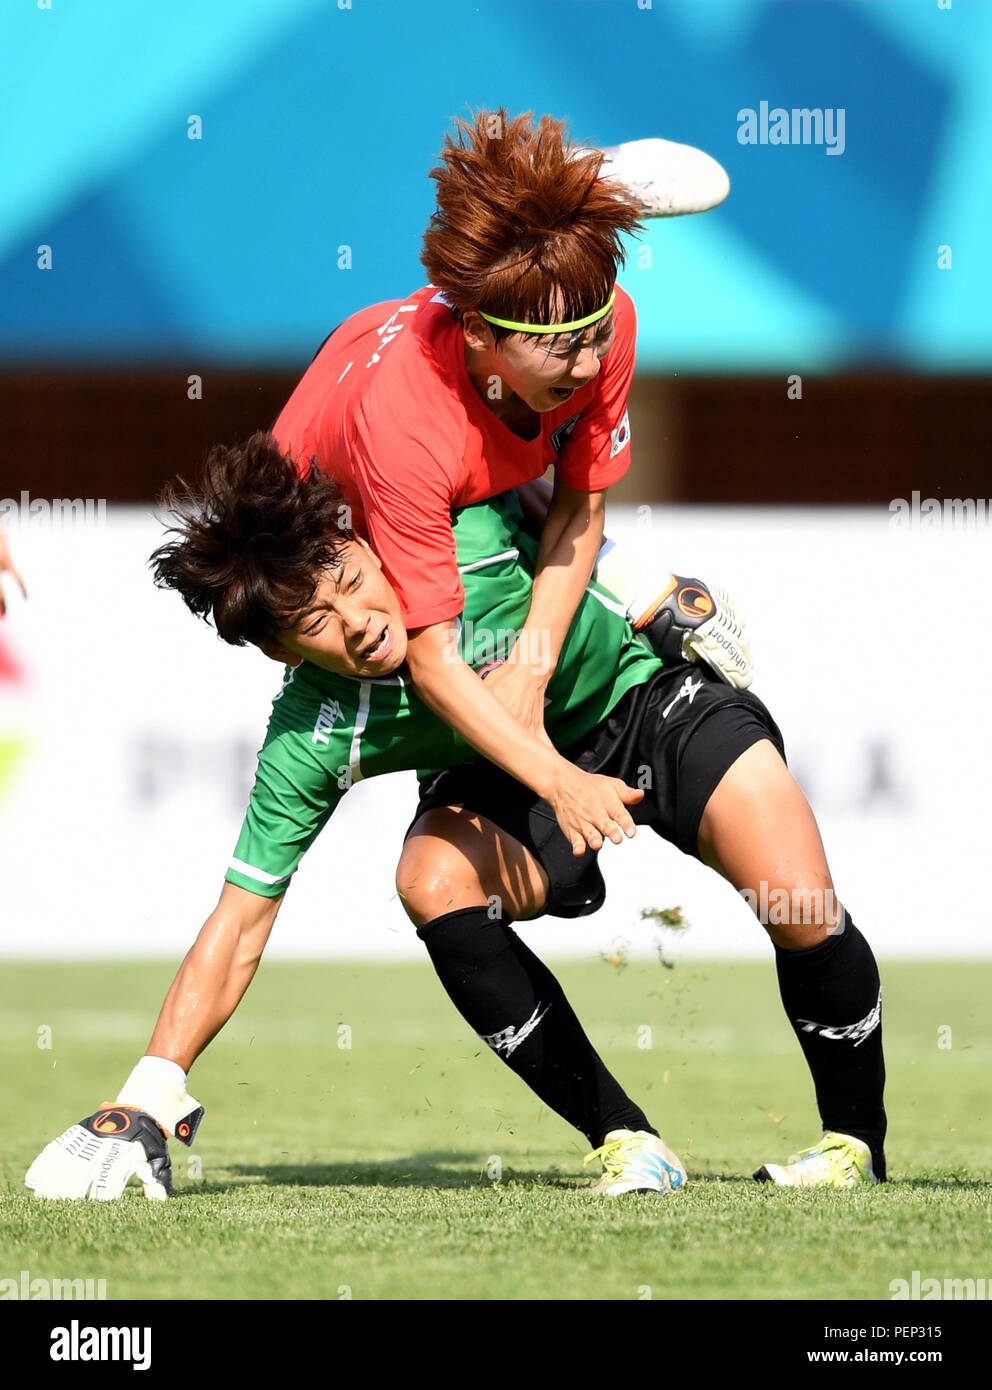 (180816) -- PALEMBANG, Aug. 16, 2018(Xinhua) -- Tsai Mingjung (bottom), goalkeeper of Chinese Taipei, competes during the Women's Football Group A match between South Korea and Chinese Taipei at the 18th Asian Games 2018 in Palembang, Indonesia, Aug. 16, 2018. (Xinhua/Cheng Min) Stock Photo